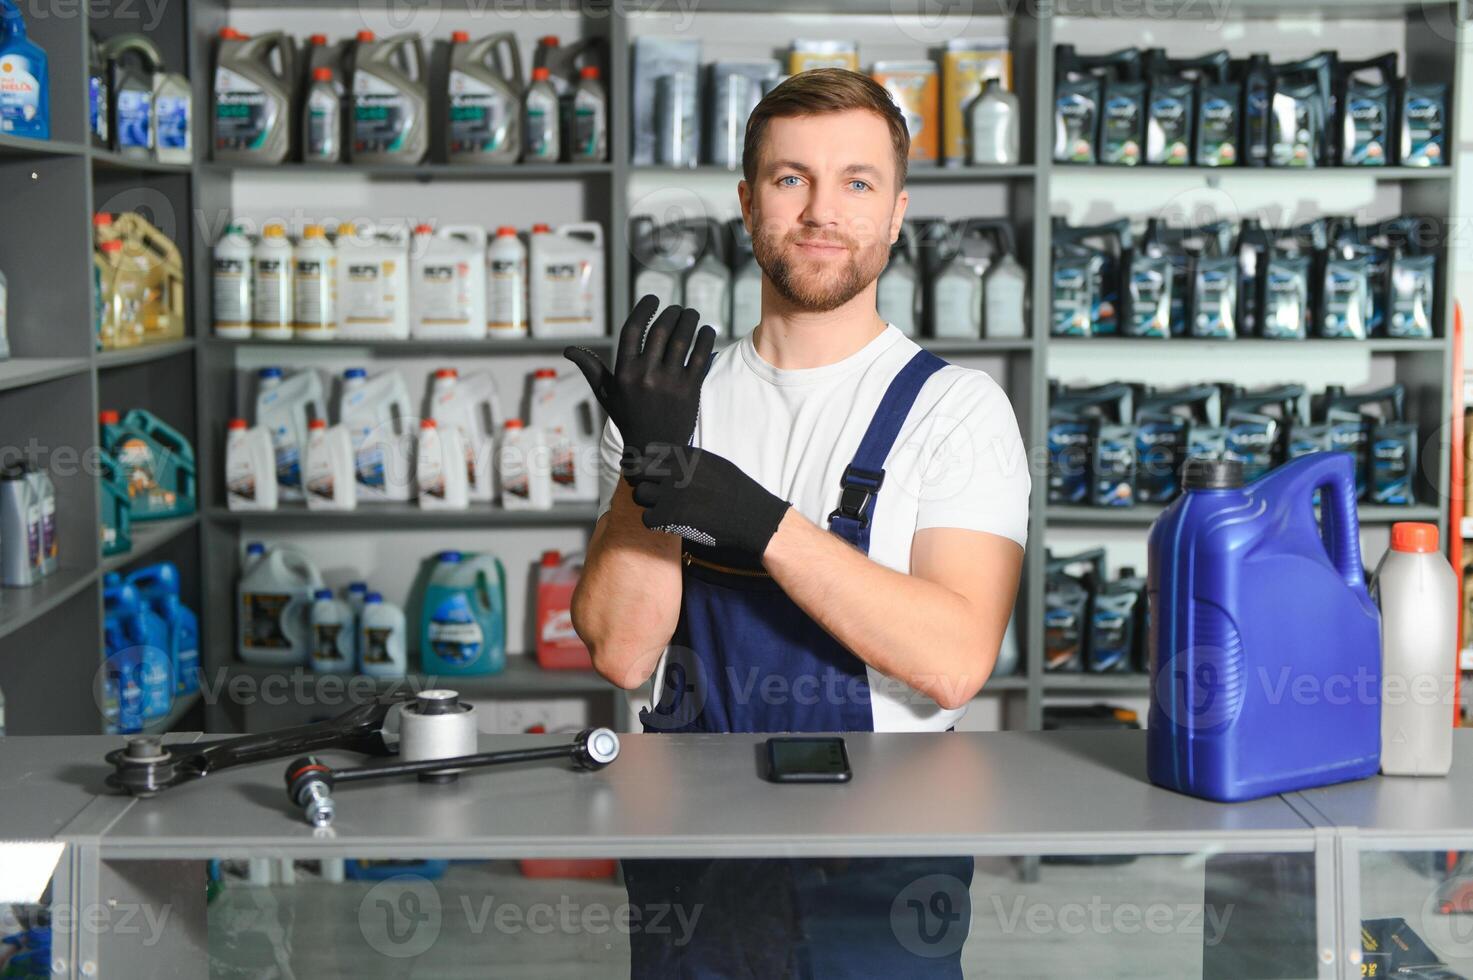 A salesman in an auto parts store. Retail trade of auto parts photo